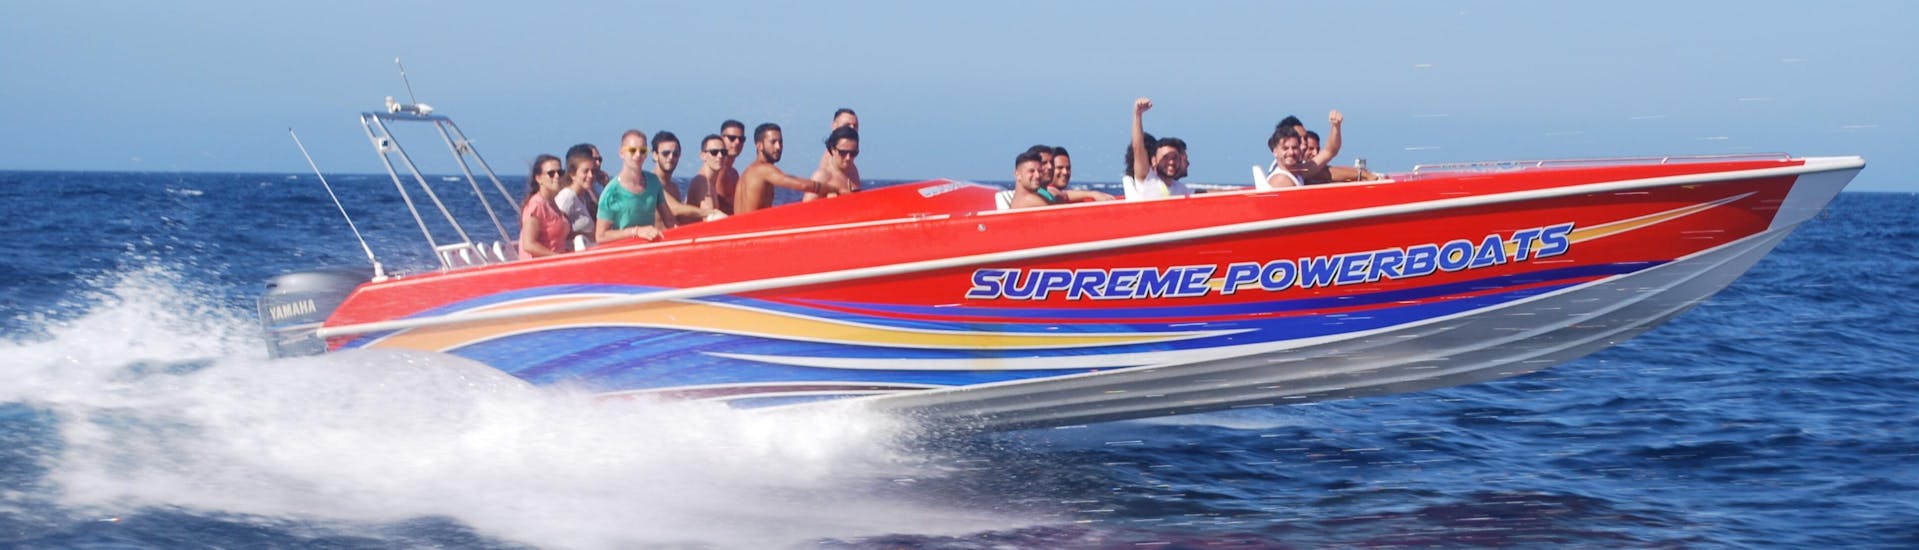 A picture of a speedboat from Supreme Powerboats Sliema on a tour to Comino Island.